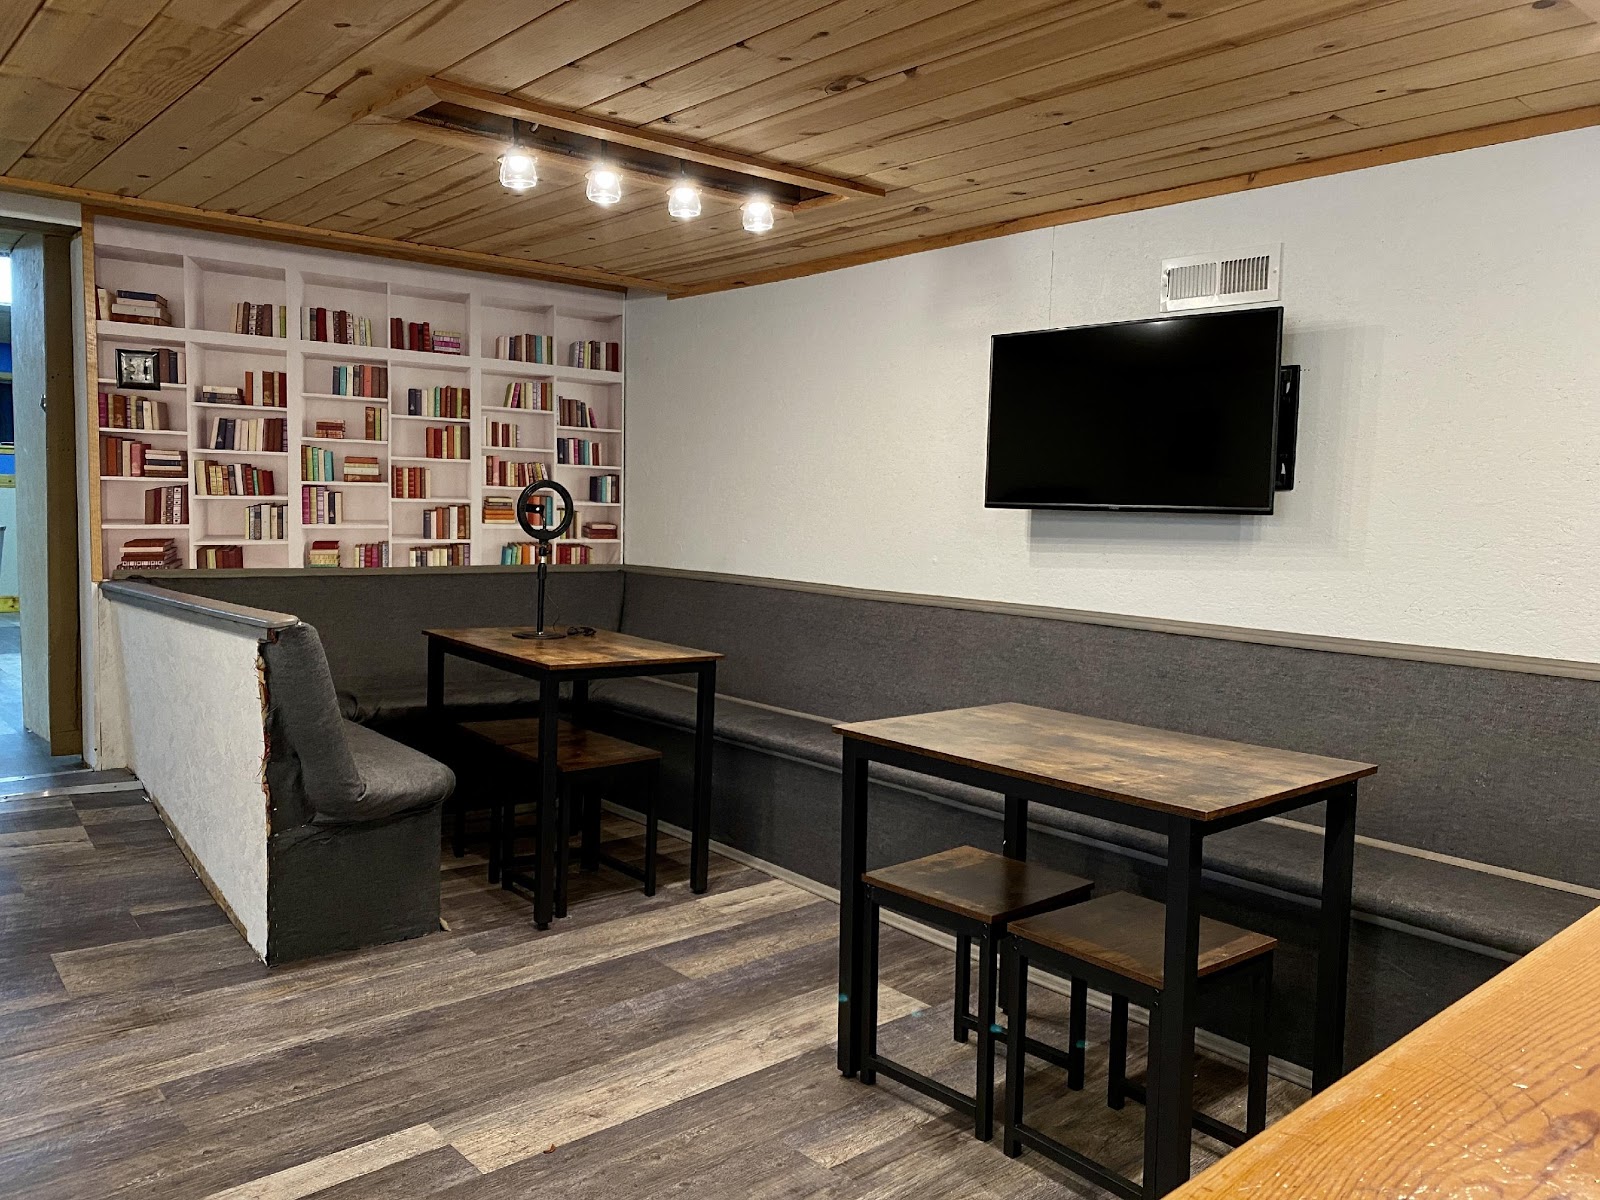 Our Business Center offers enhanced Wi-fi connectivity to our 1gb service, complimentary printing options and a coffee/tea bar, as well as a full kitchen, Cable TV, Zoom corner and a relaxed atmosphere away from your rig.